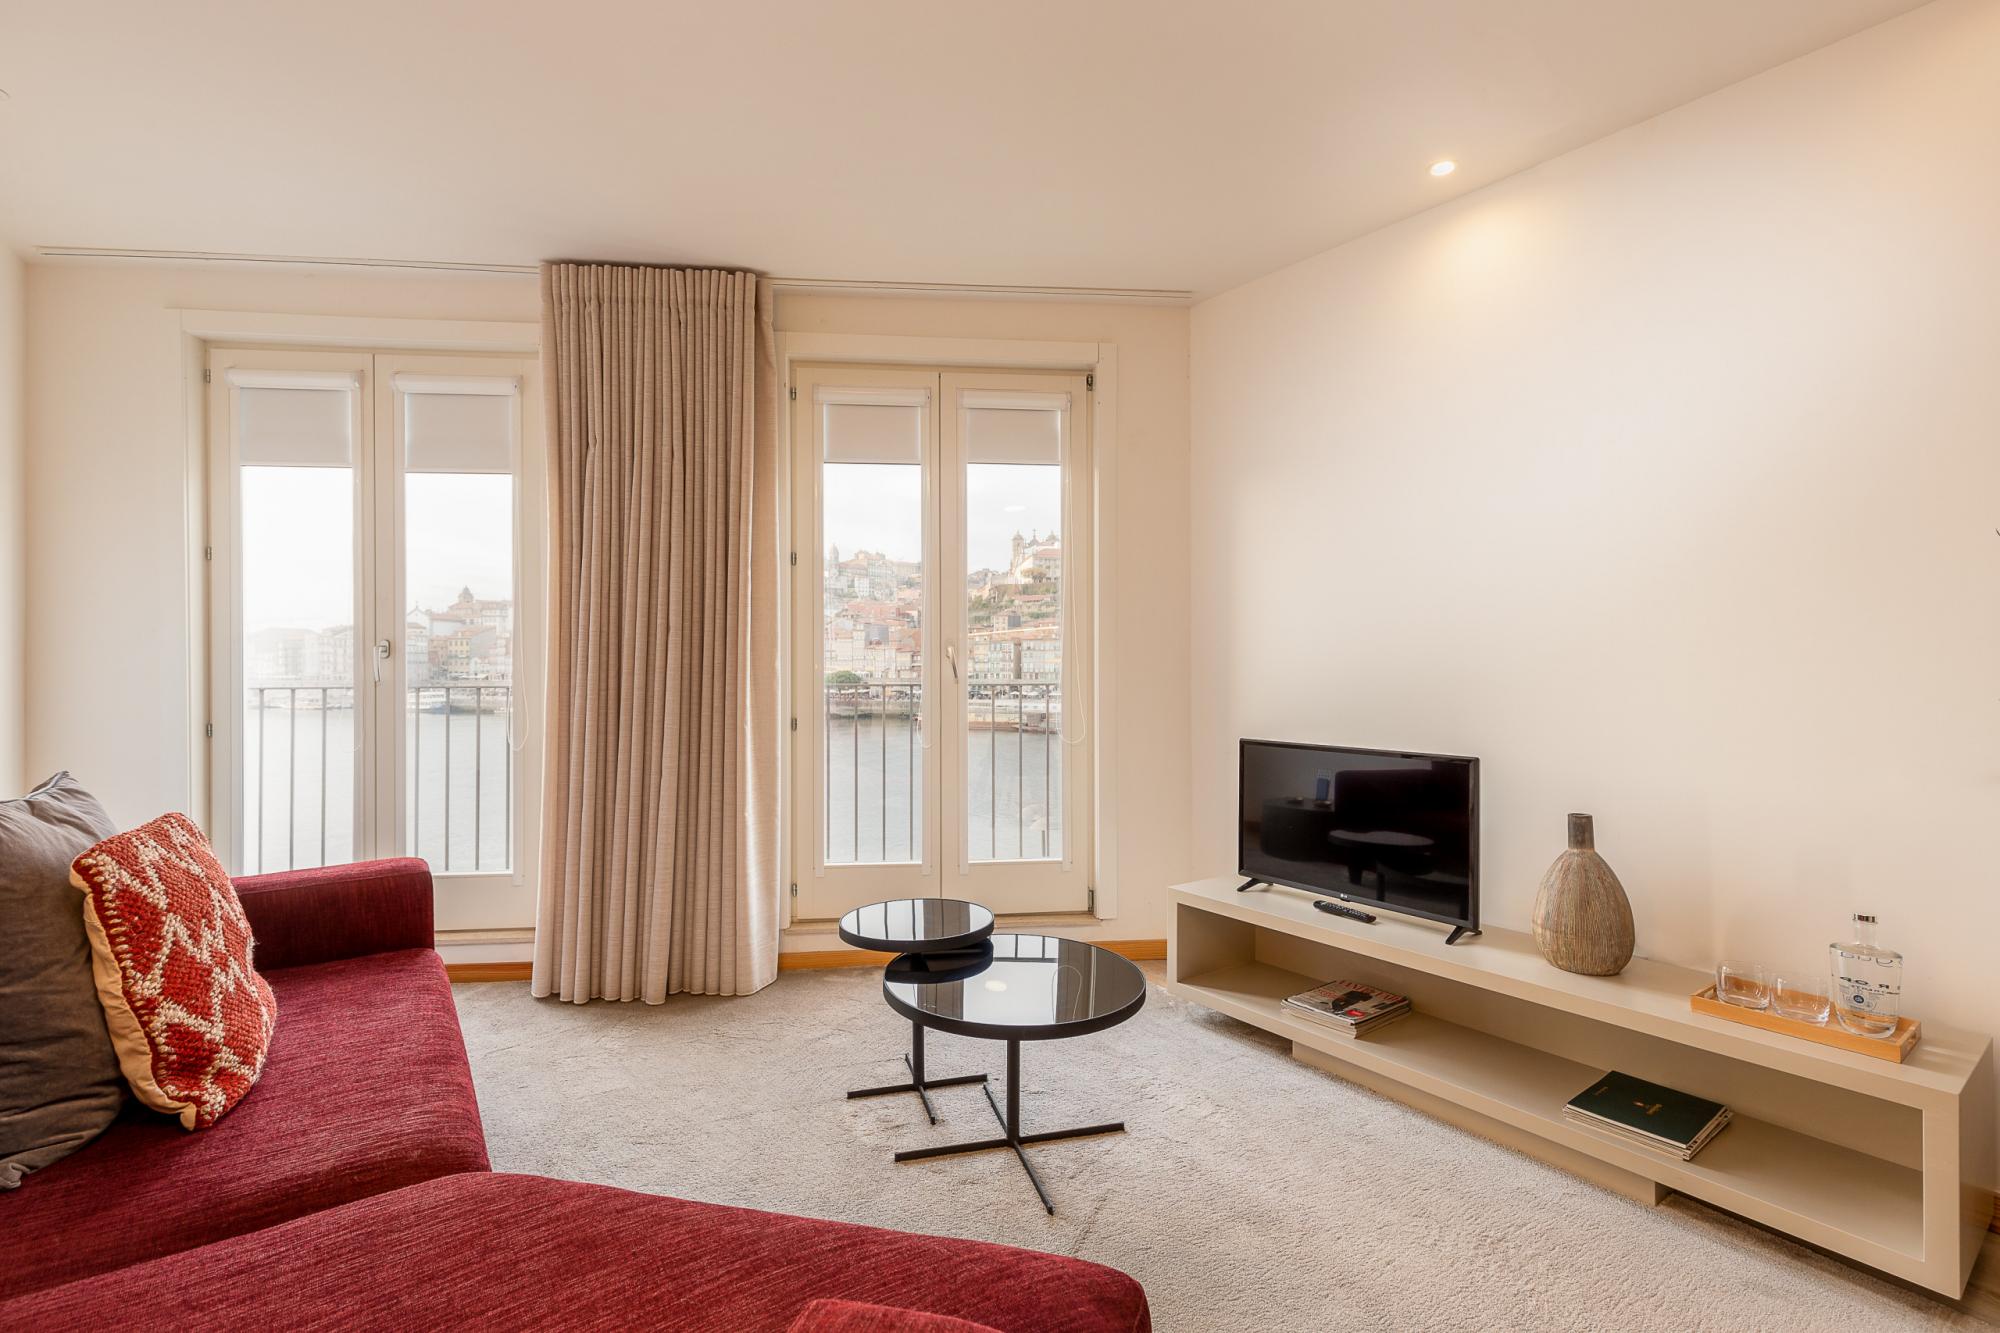 Property Image 2 - Superb Luxury Apartment with Views of the City River